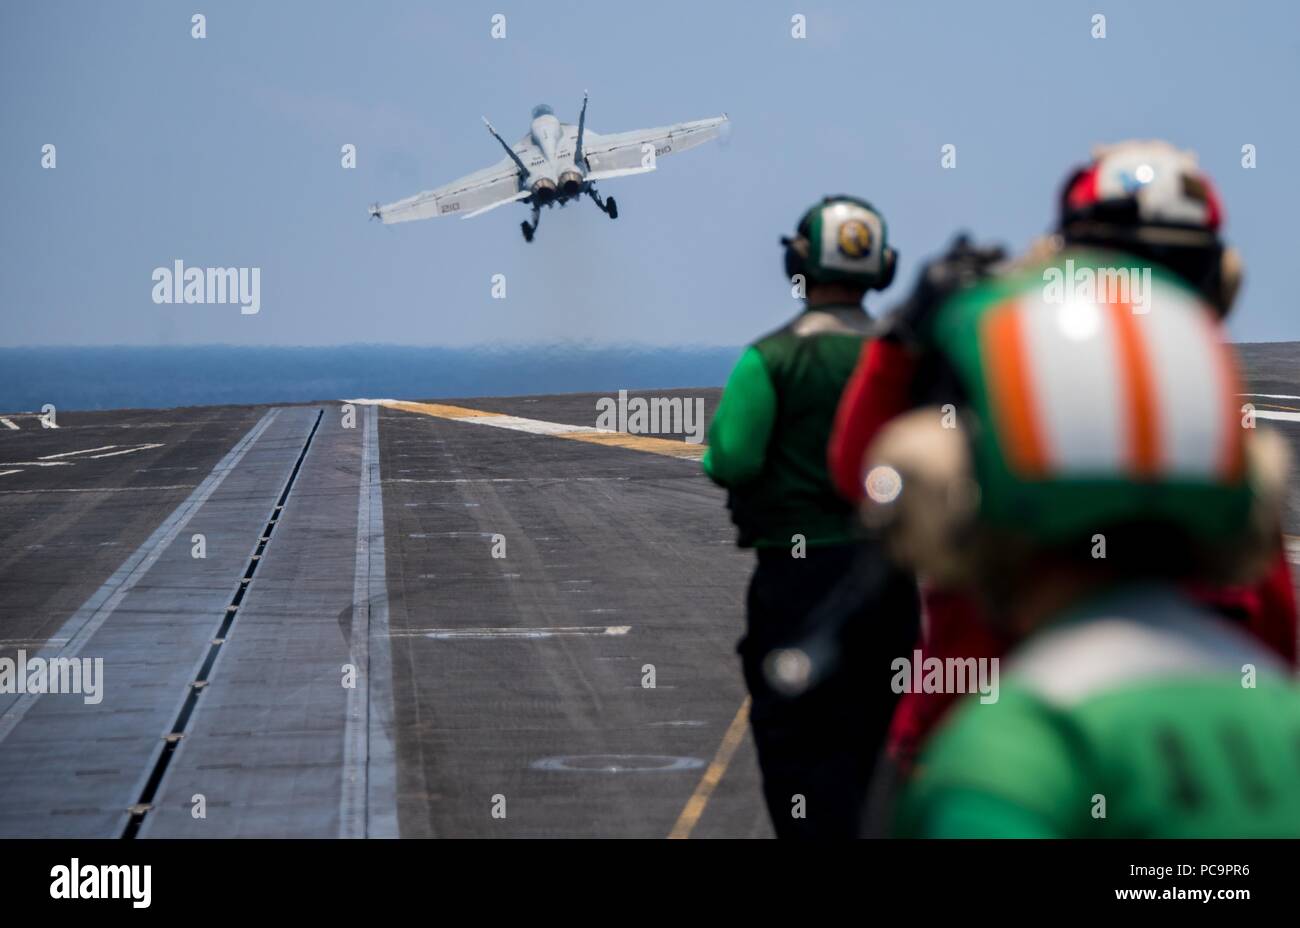 180723-N-VQ841-0219PACIFIC OCEAN (July 23, 2018) An F/A-18E Super Hornet assigned to the 'Kestrels' of Strike Fighter Squadron (VFA) 137 takes off from the flight deck of the Nimitz-class aircraft carrier USS Carl Vinson (CVN 70), July 23, 2018. (U.S. Navy photo by Mass Communication Specialist Seaman Ethan J. Soto/Released) Image courtesy Seaman Apprentice Ethan Soto/U.S. Navy. () Stock Photo